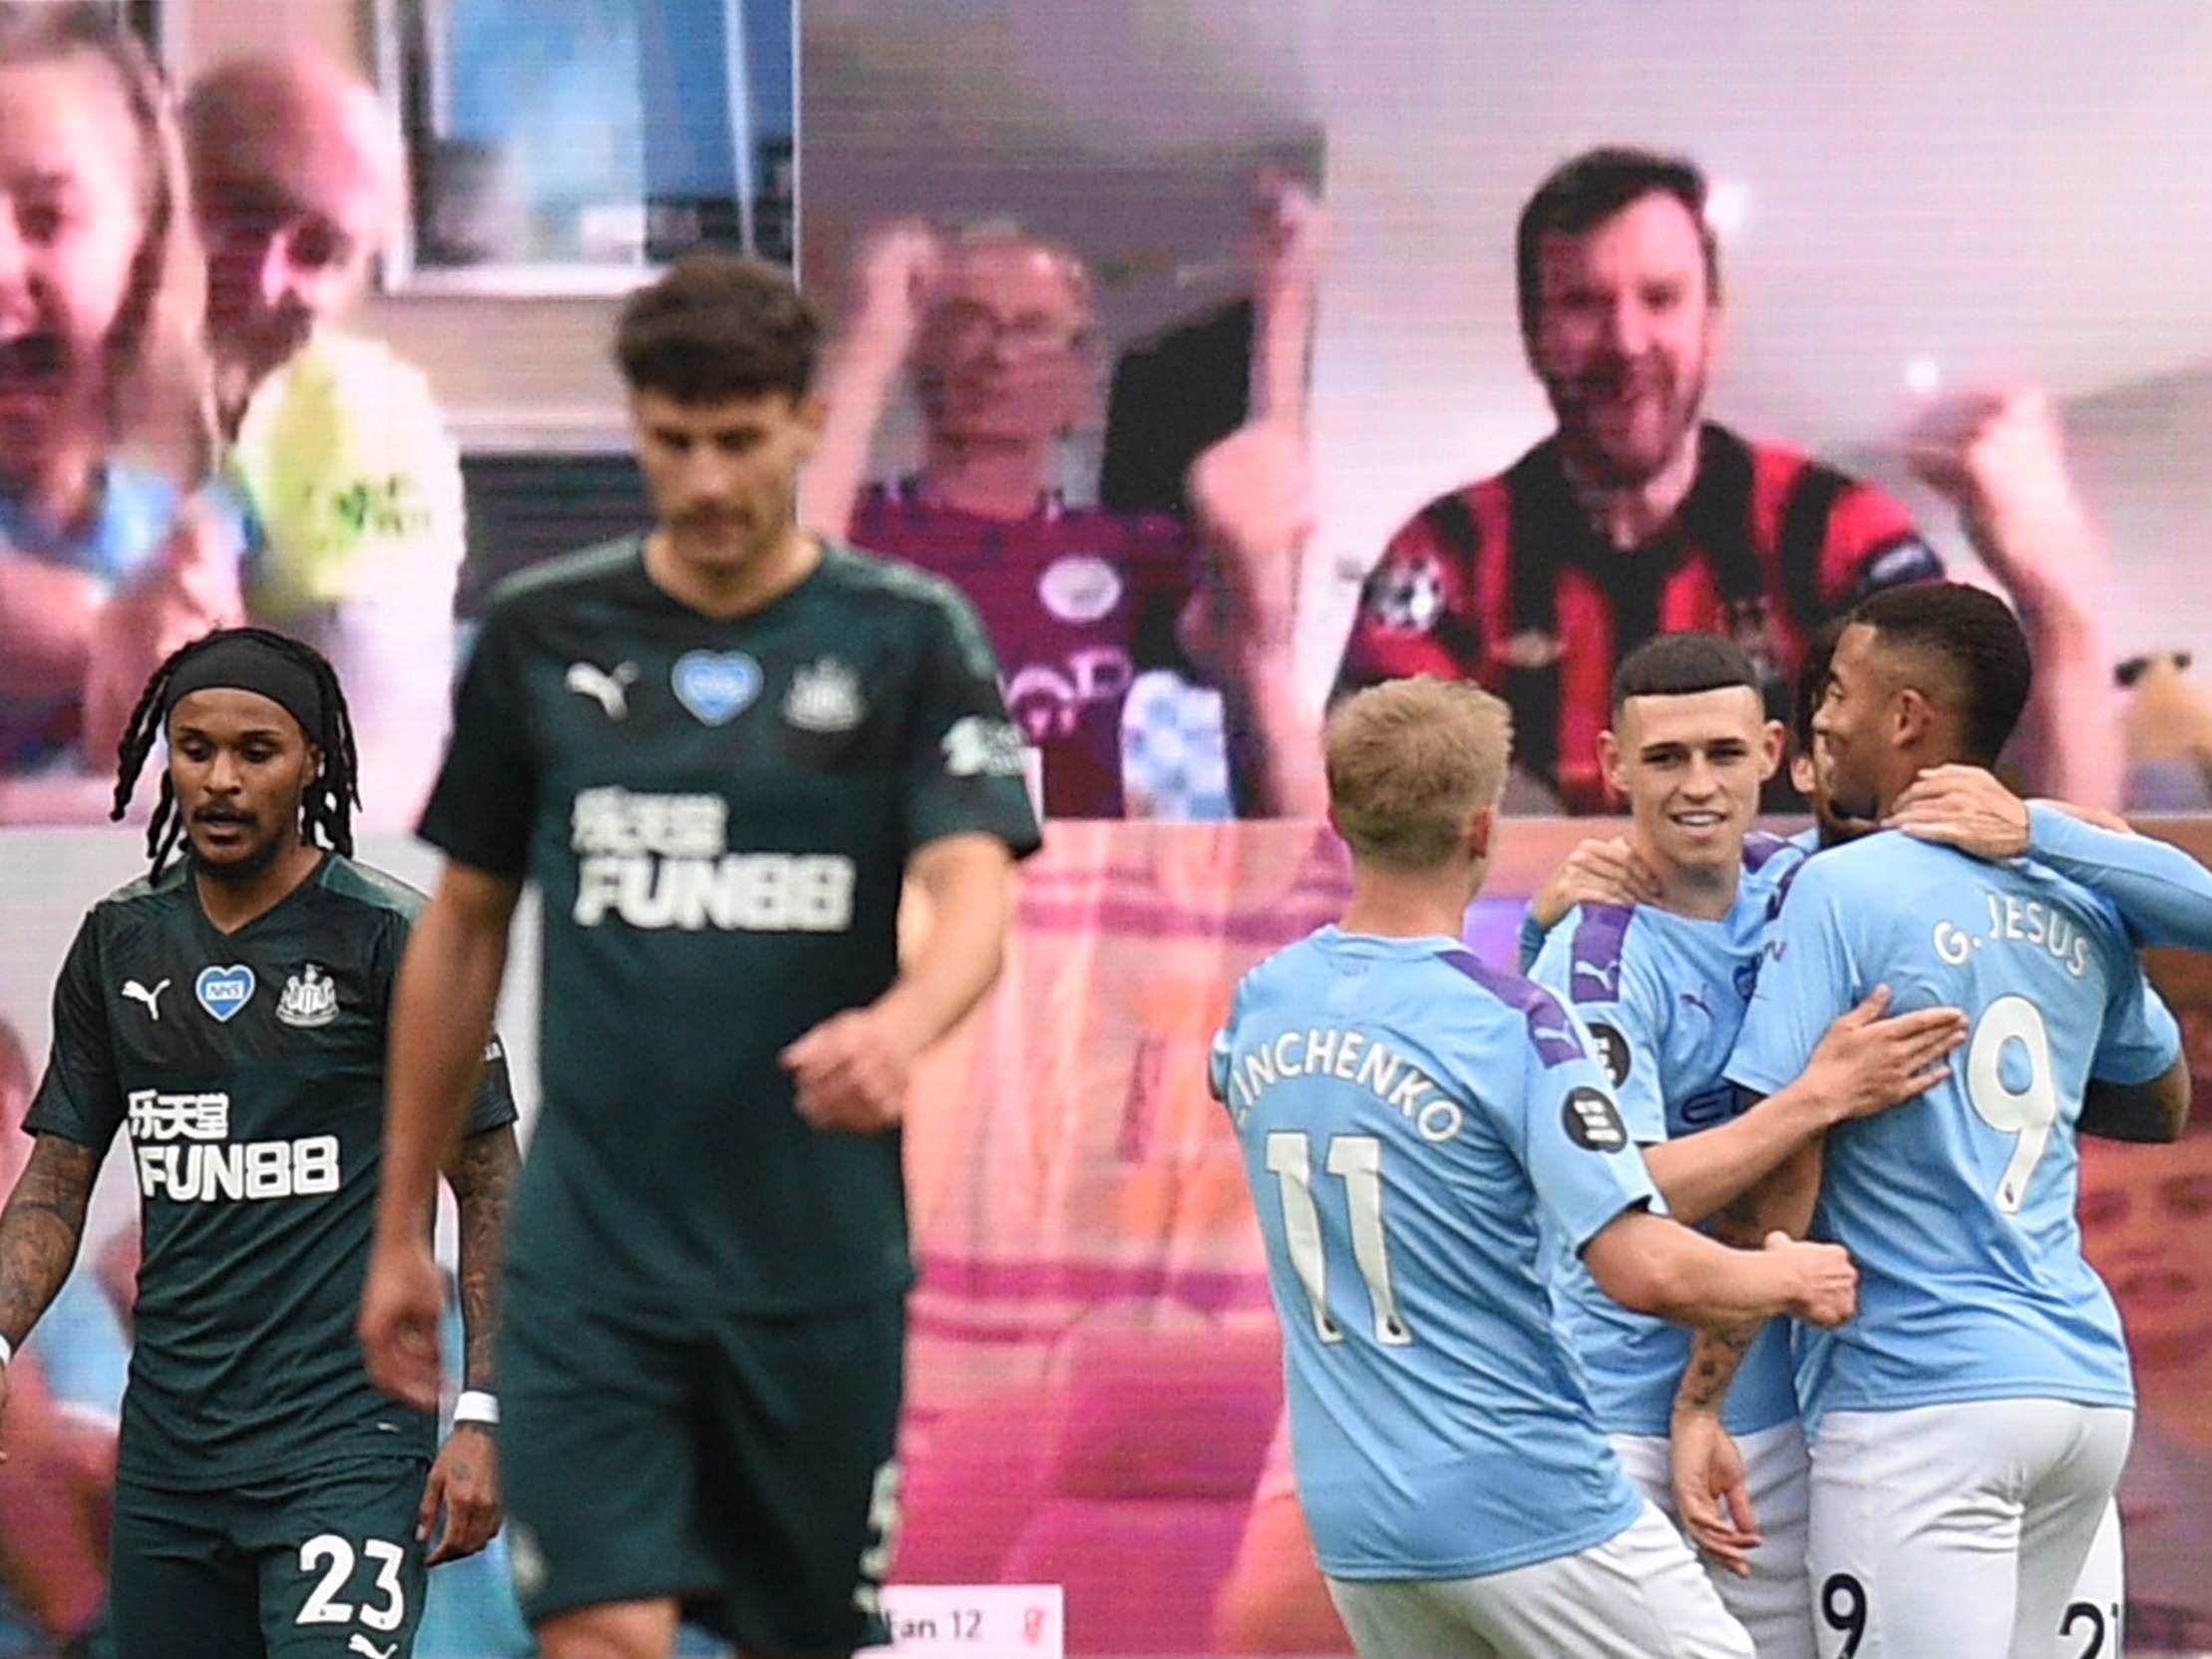 Man City vs Newcastle LIVE: Result and reaction from Premier League fixture tonight